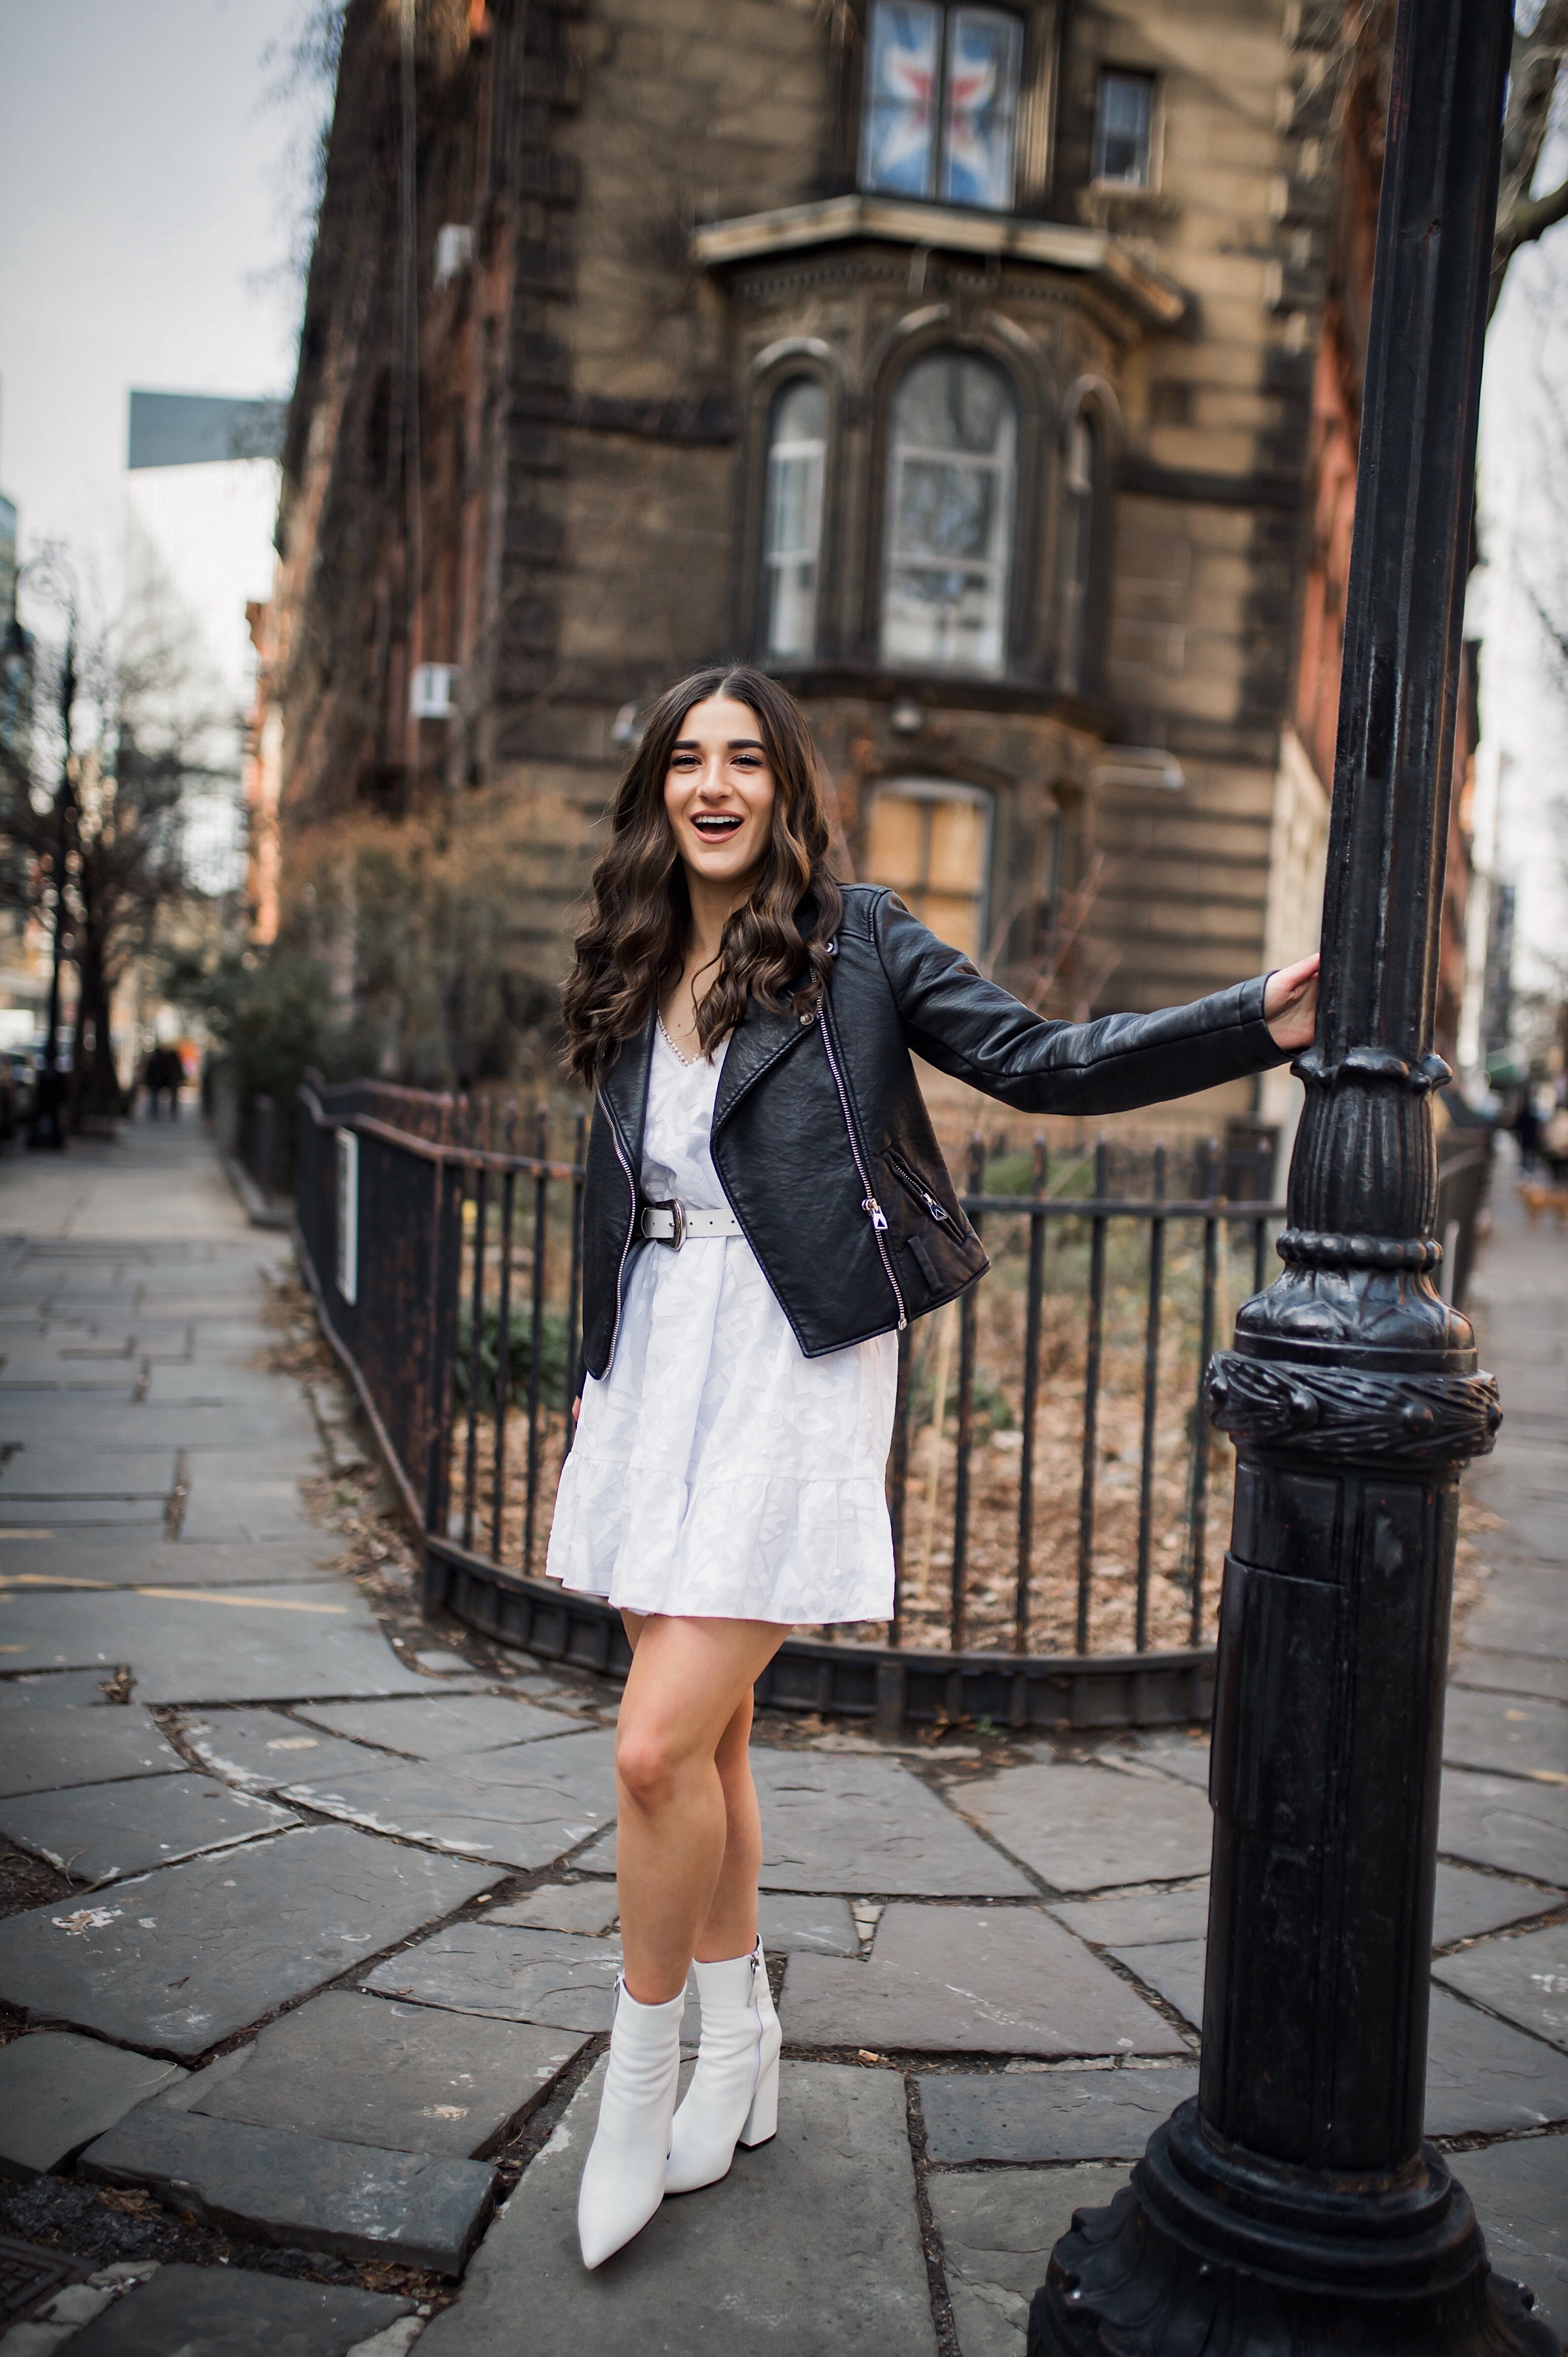 5 Things I Wish Brands Knew White Dress Leather Jacket Esther Santer Fashion Blog NYC Street Style Blogger Outfit OOTD Trendy Shopping Girl What How To Wear Urban Outfitters ASOS Belt Booties Black Beaded Clutch Long Hair Photoshoot  Stuyvesant Shop.JPG